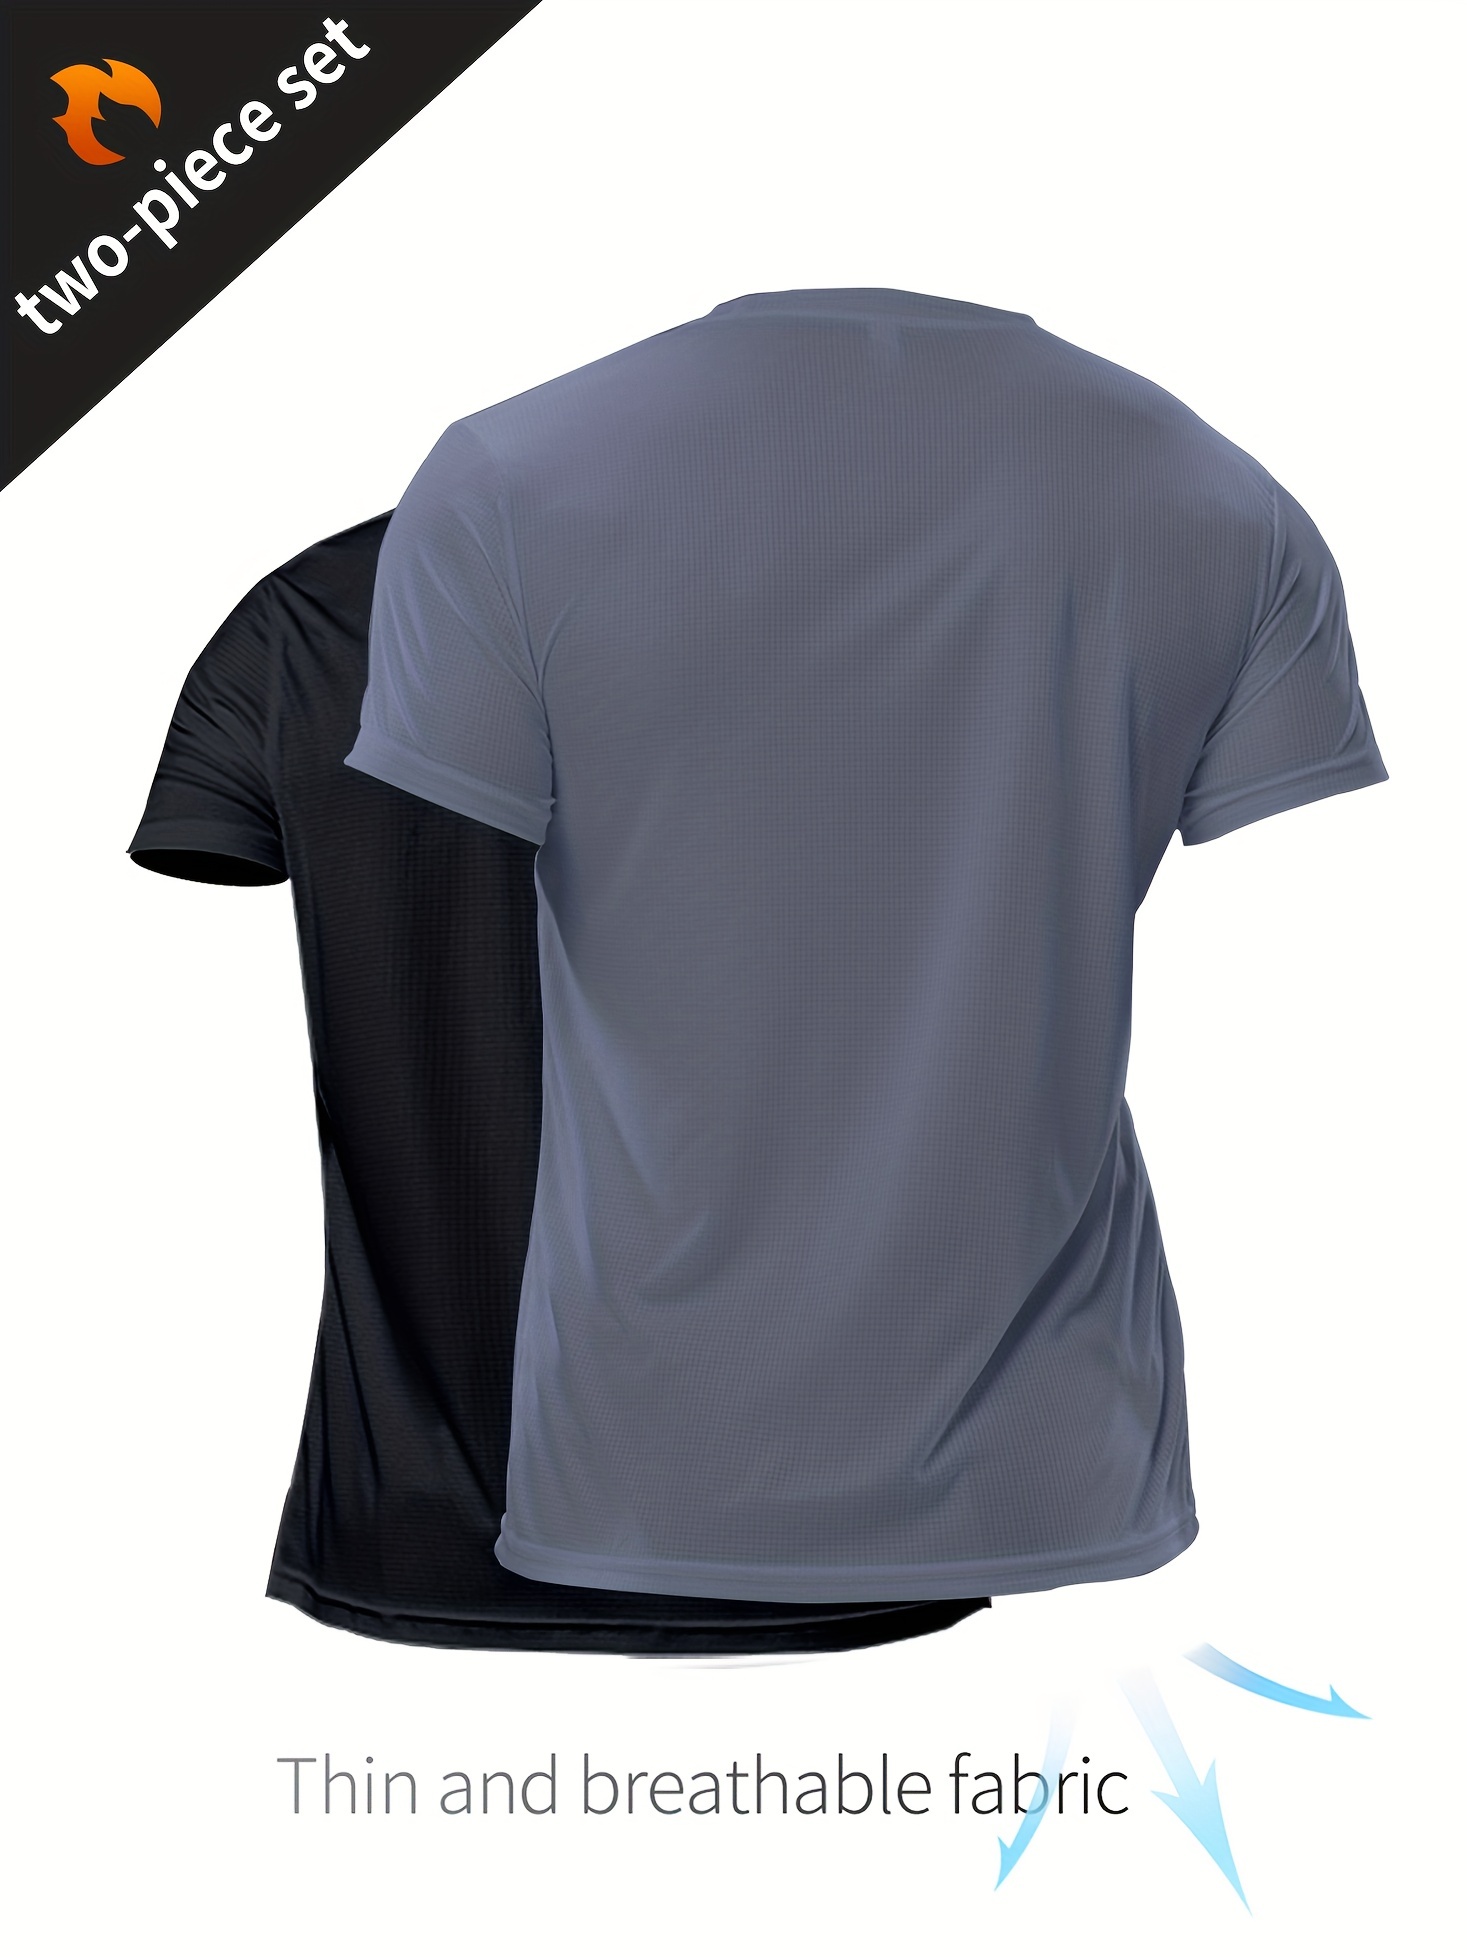 ACTIVE-DRY Plain Cotton Touch Breathable Polyester Sports Tee T-Shirt Tshirt